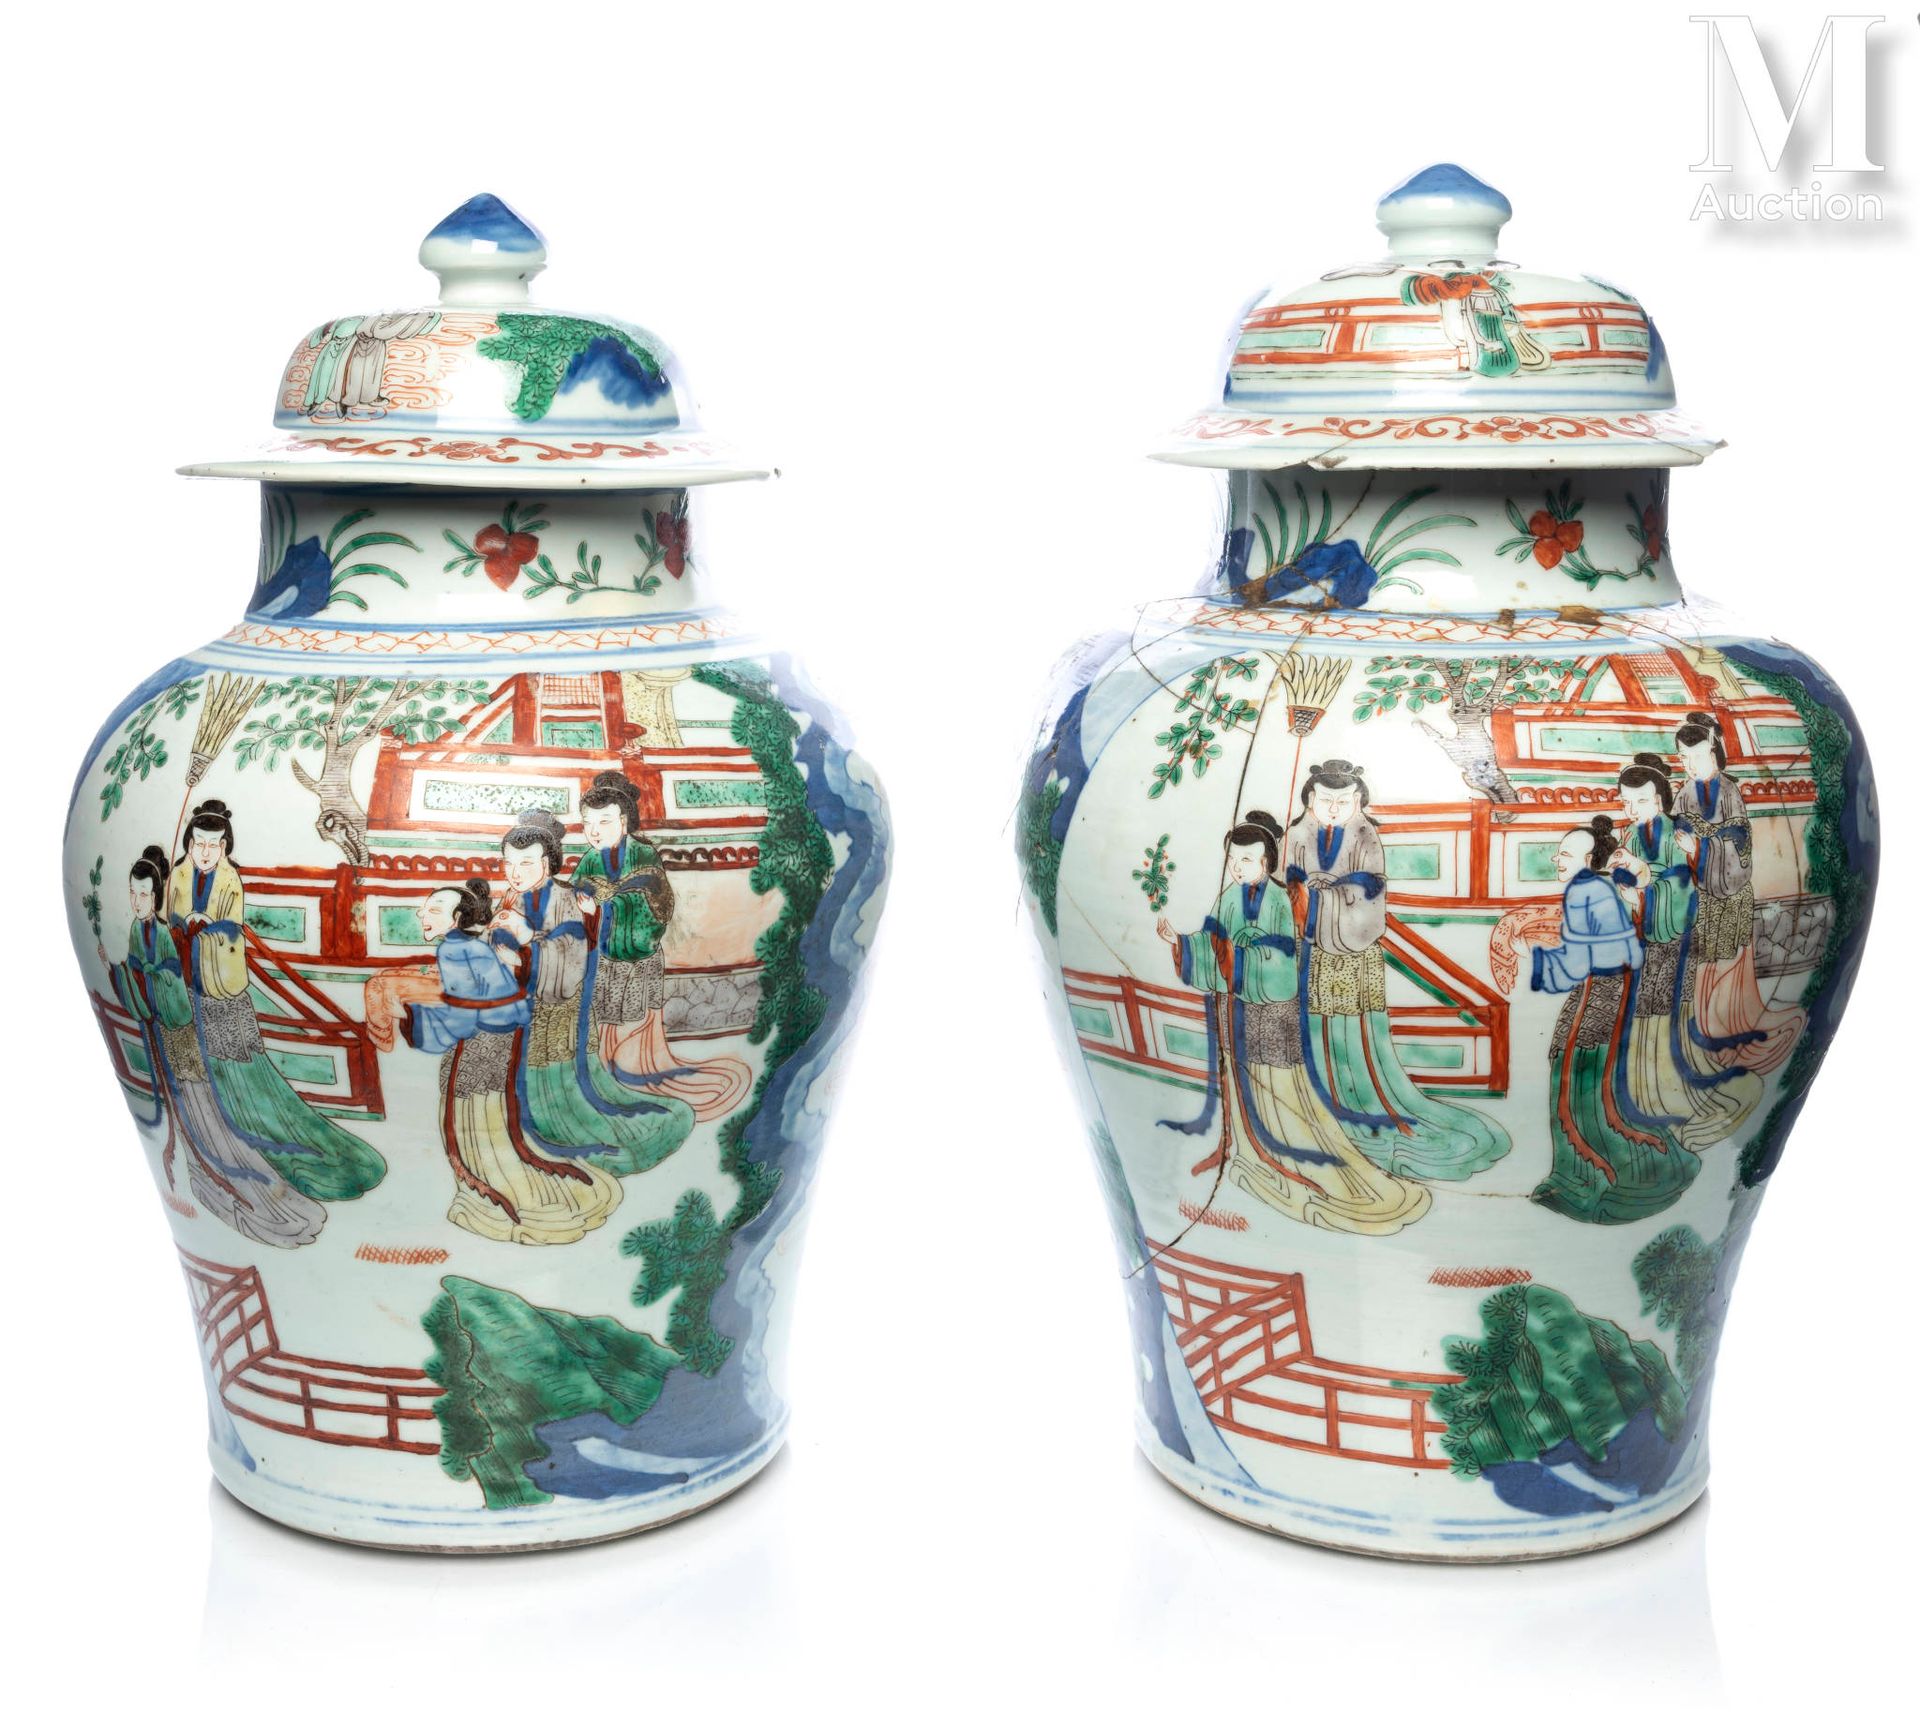 CHINE, Epoque Transition, XVIIe siècle Pair of covered jars

with arched bases, &hellip;